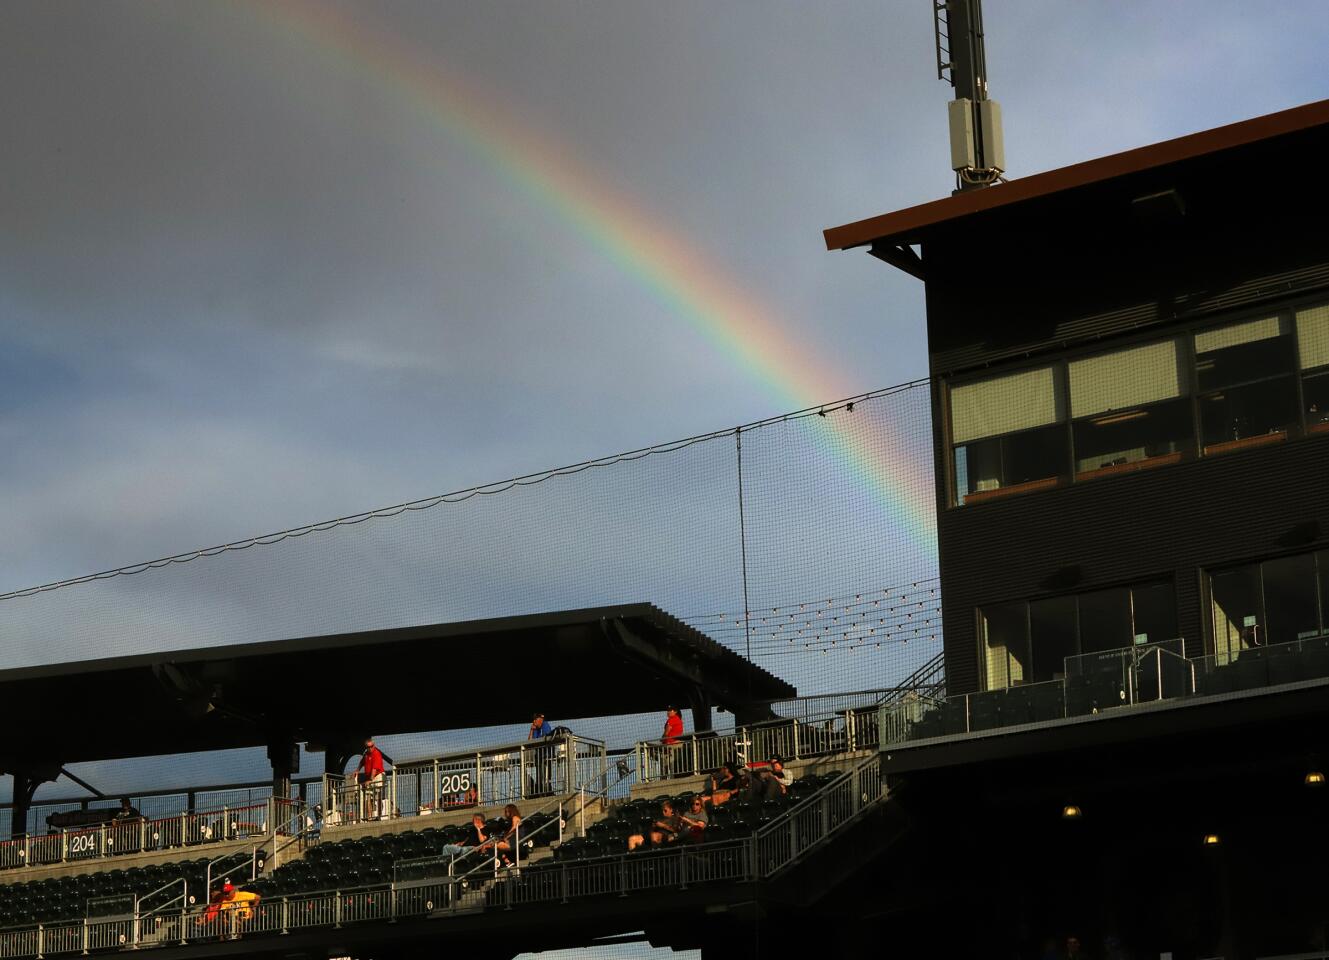 A rainbow appears over the grand stands at Southwest University Park during a minor league baseball game Wednesday, August 7 in El Paso, TX.